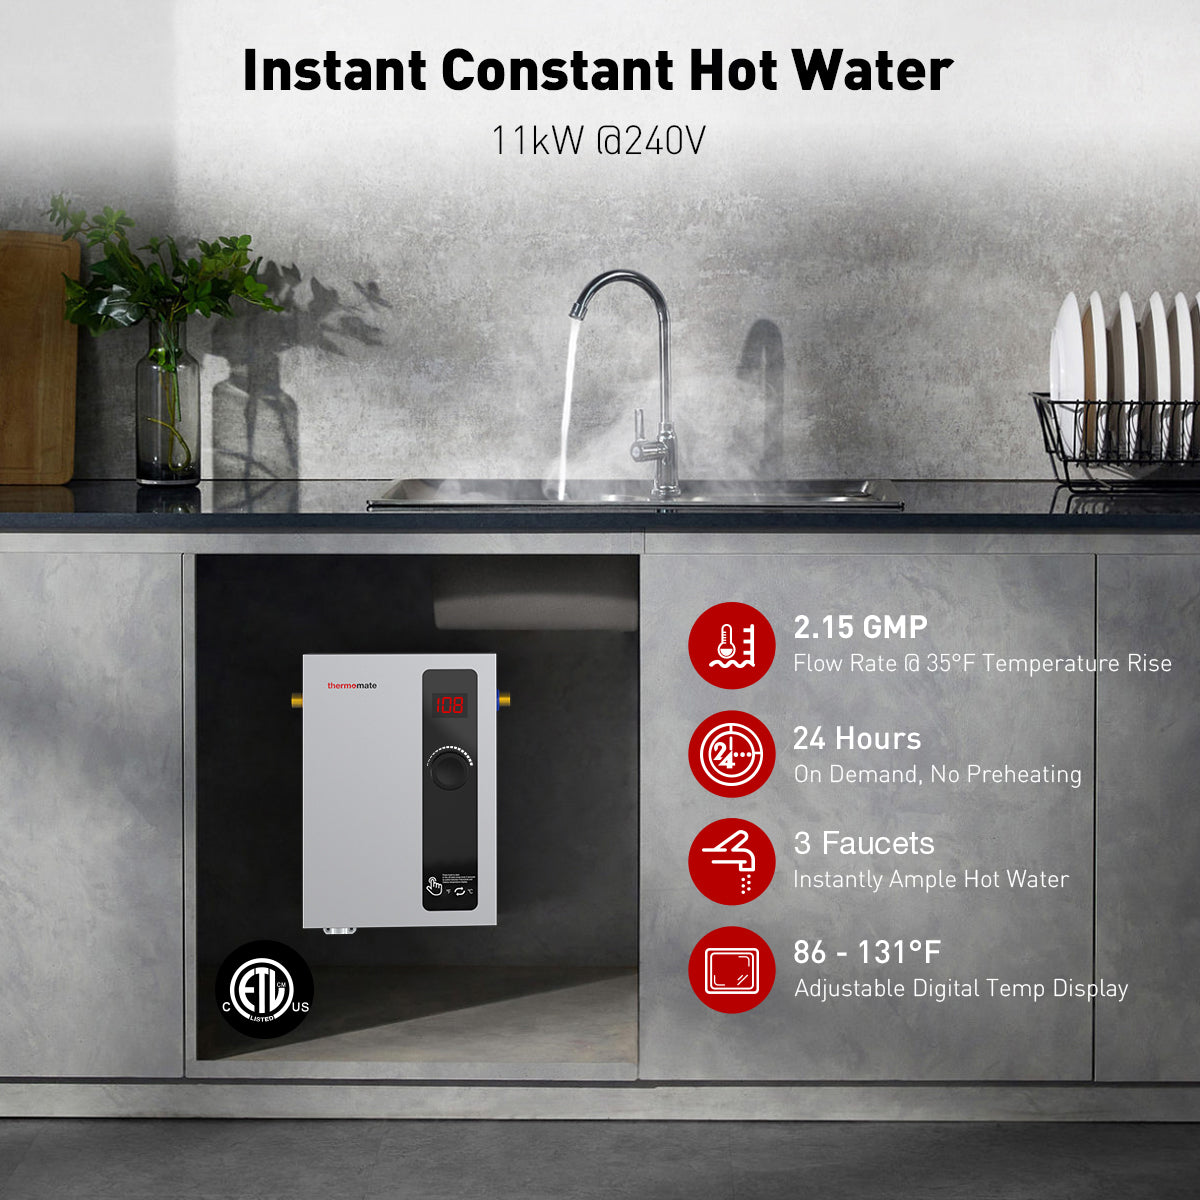 Instant Constant Hot Water | Thermomate